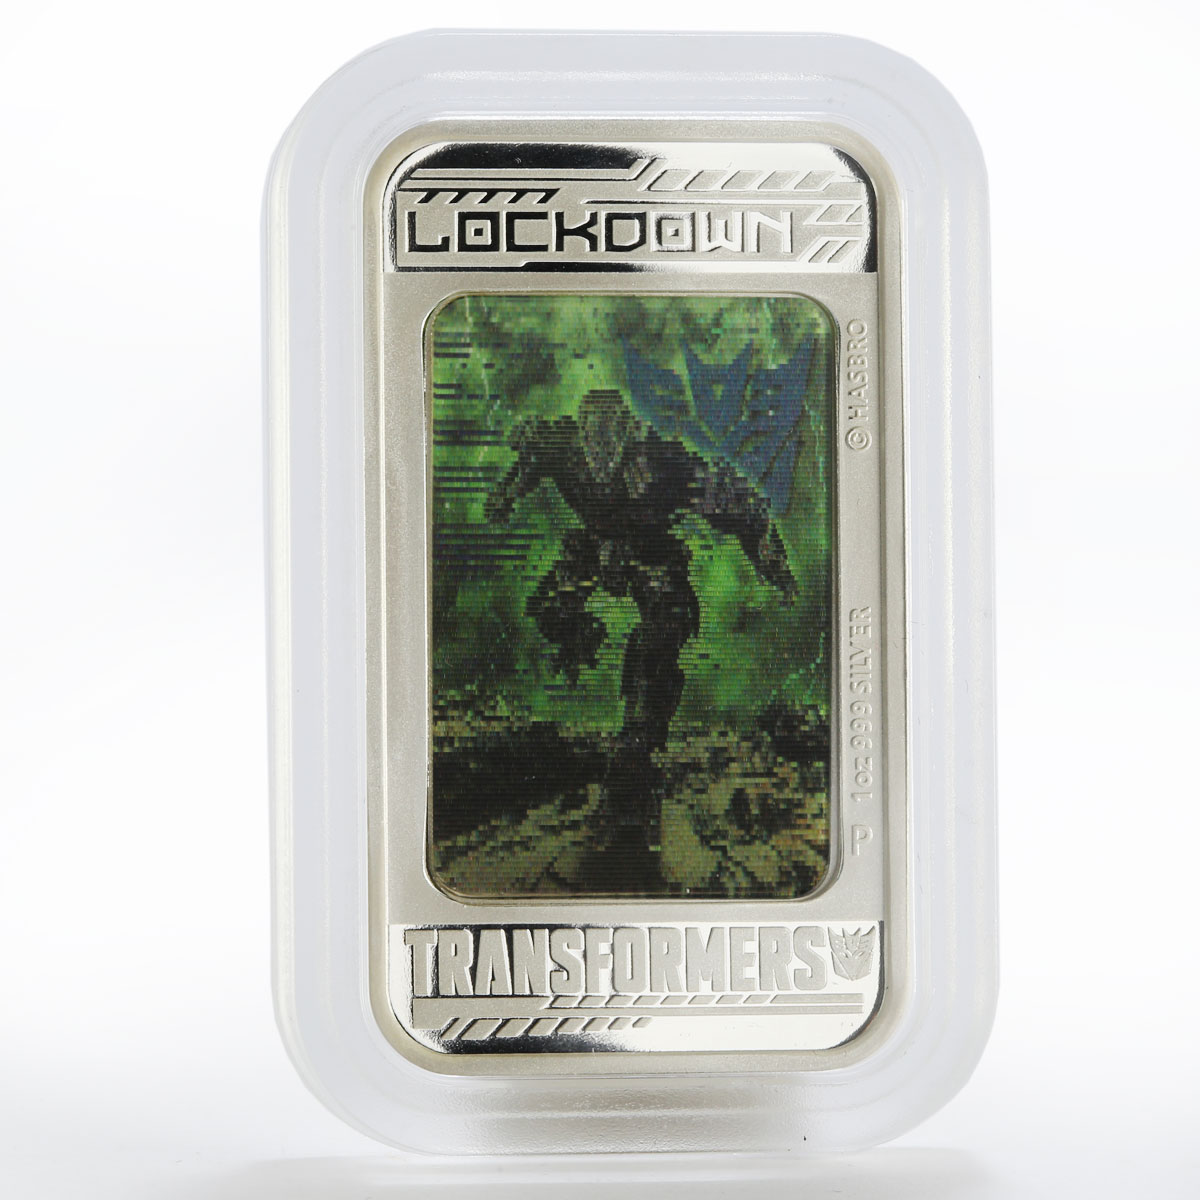 Tuvalu 1 dollar Transformers Lockdown hologram colored proof silver coin 2014